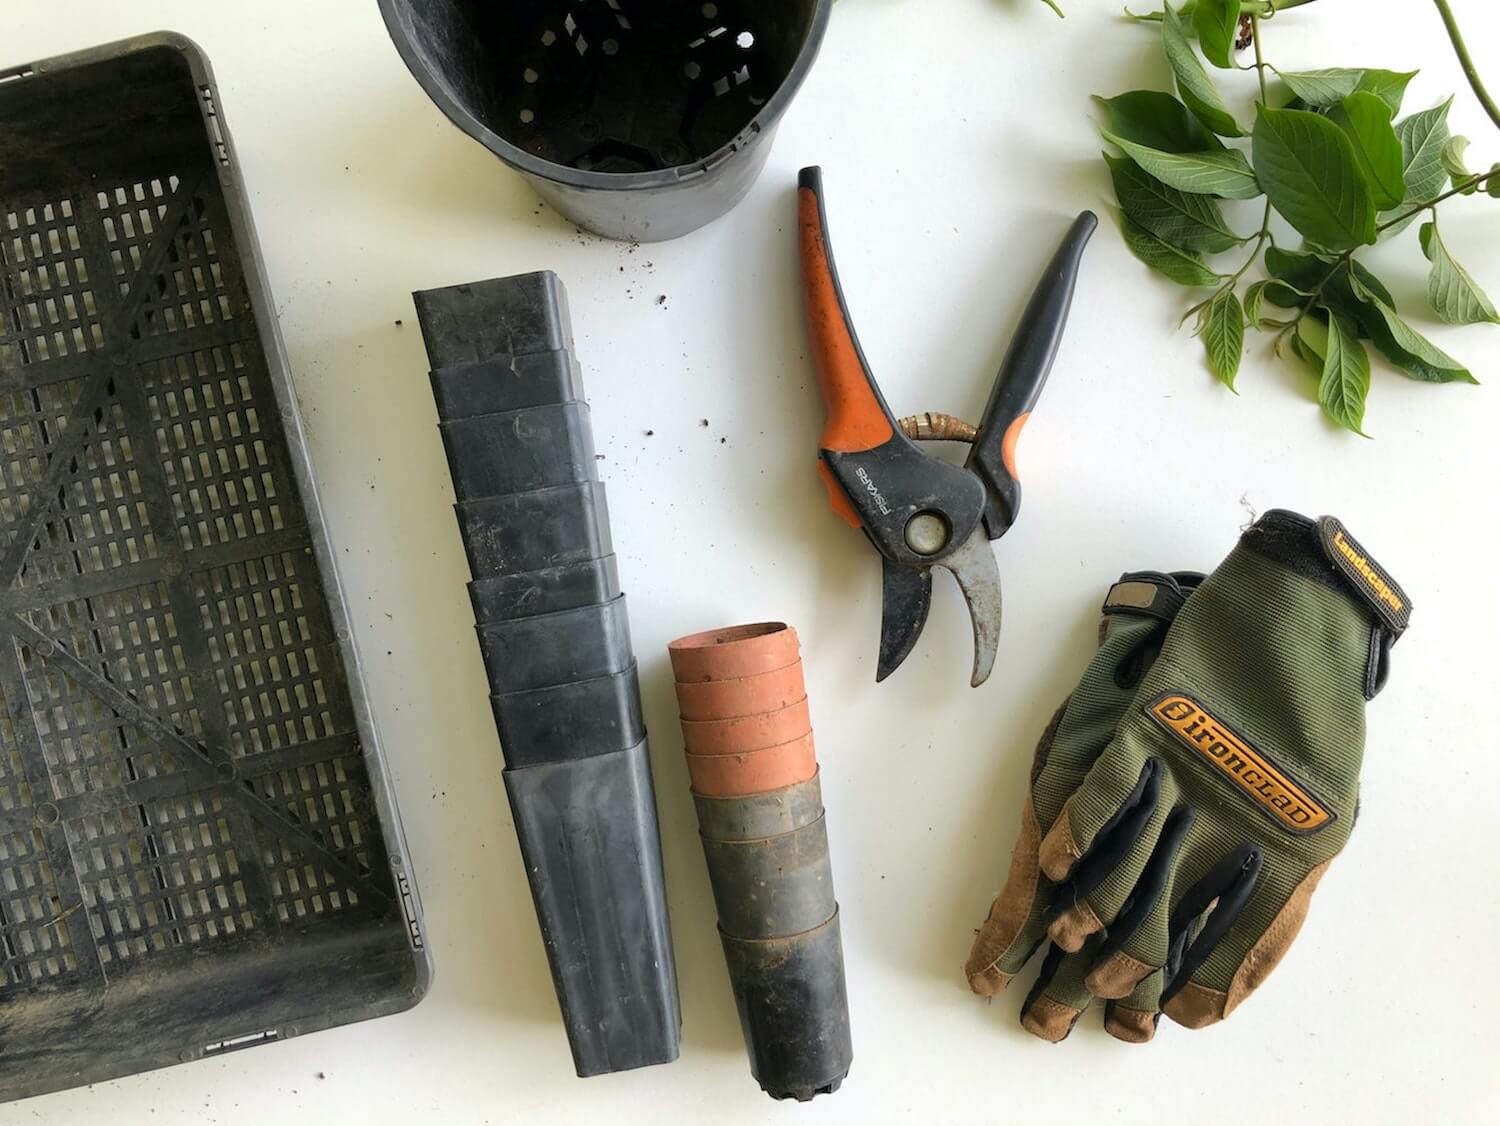 How to Maintain Garden Tools